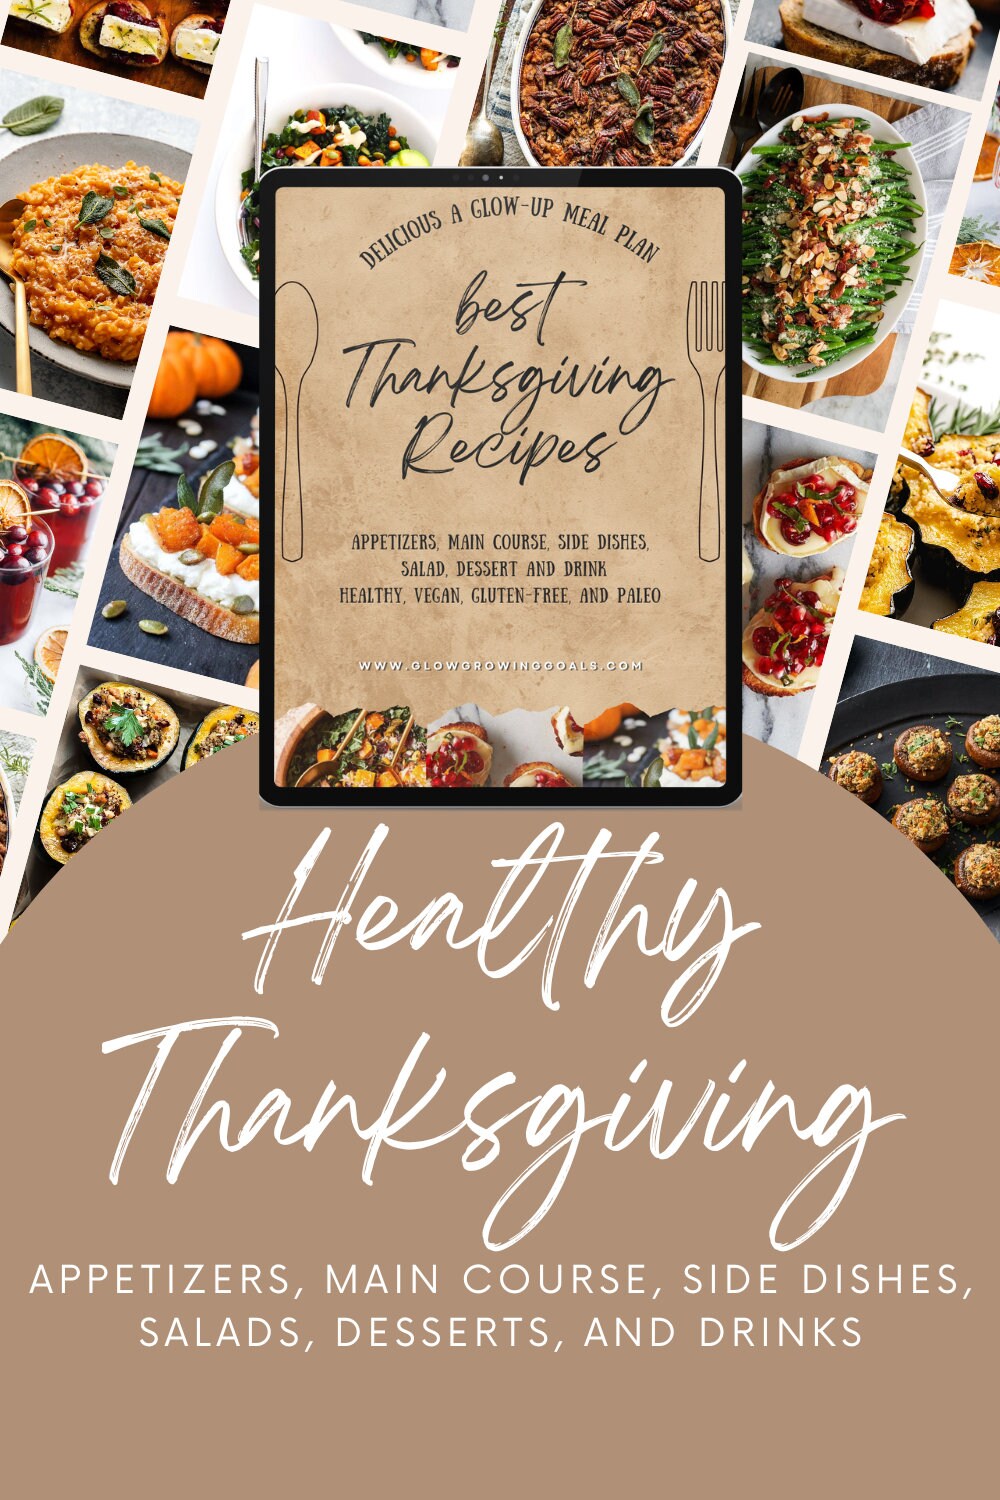 ꔛbest Delicious Healthy Thanksgiving Recipes for Dinner Party - Etsy